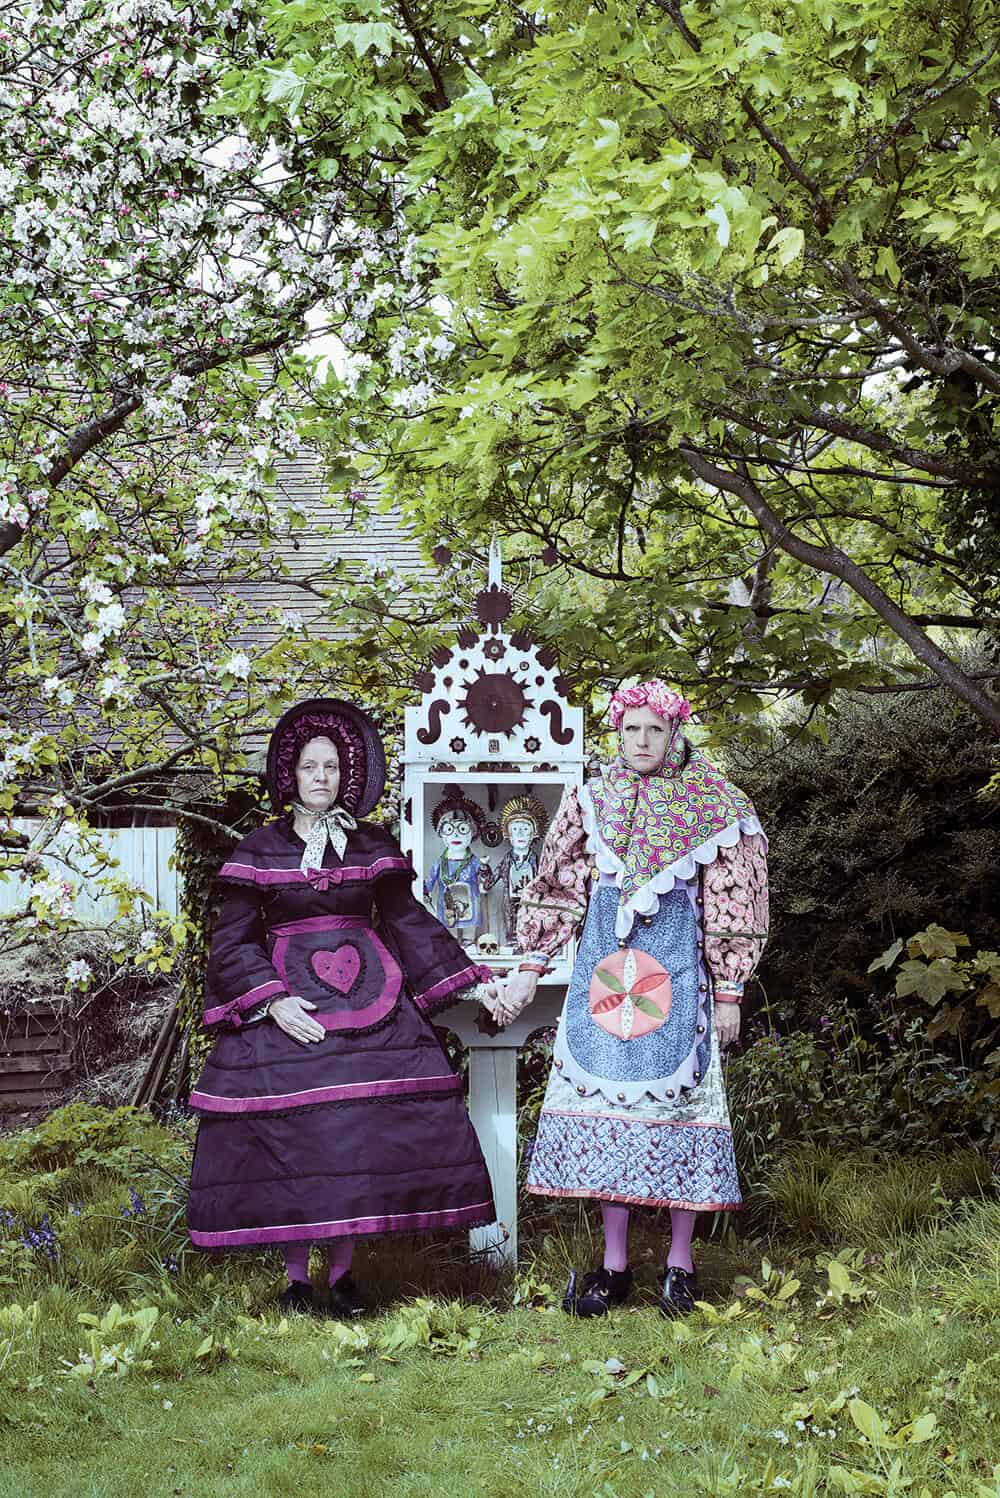 Grayson Perry, Couple visiting Marriage Shrine, 2017. C-type print, 75 x 50 cm. © Grayson Perry. Image courtesy of the artist and Victoria Miro, London.